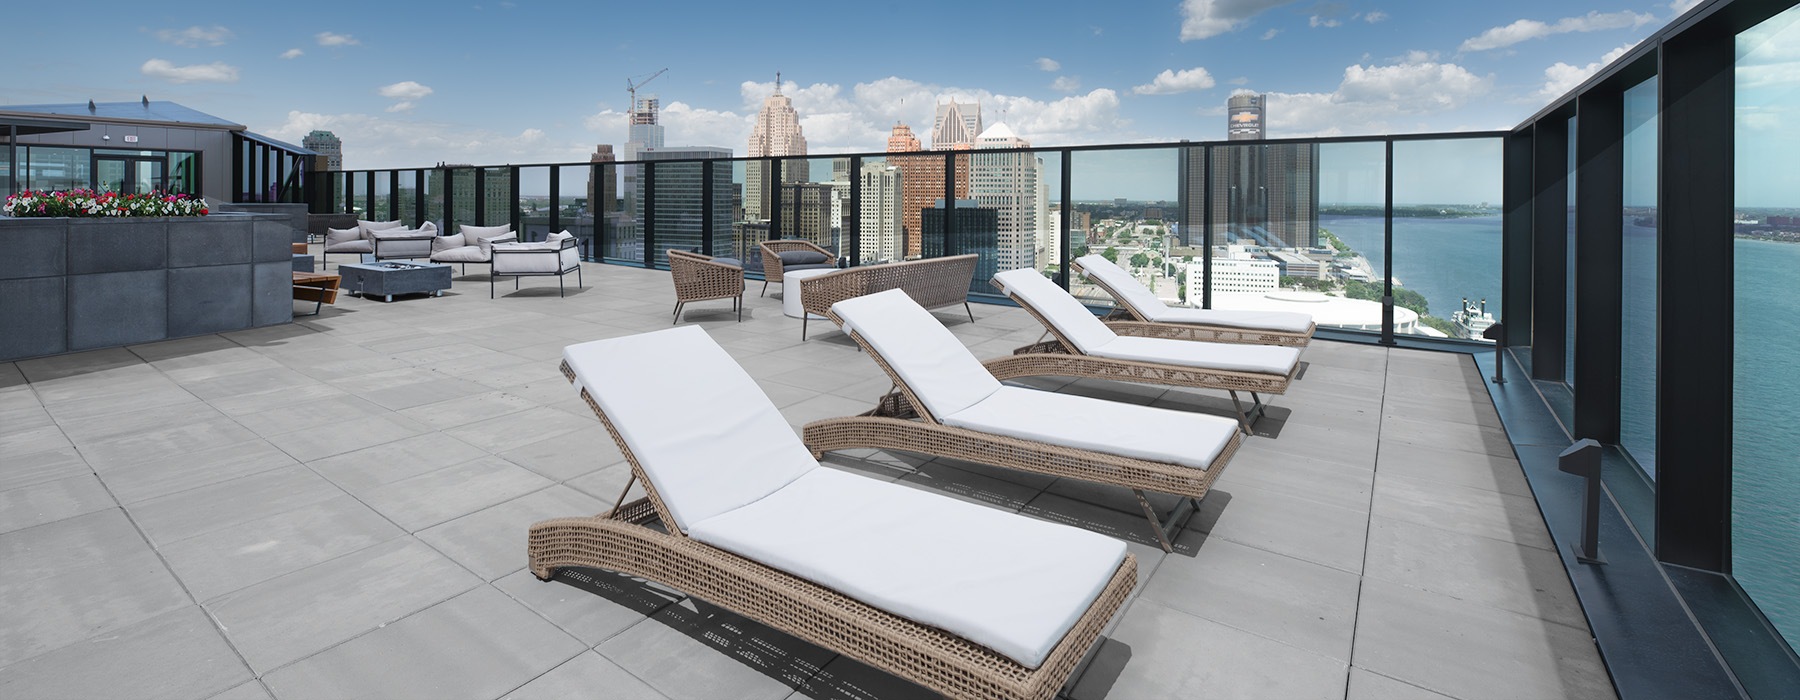 Rooftop patio deck with views of the Detroit Skyline